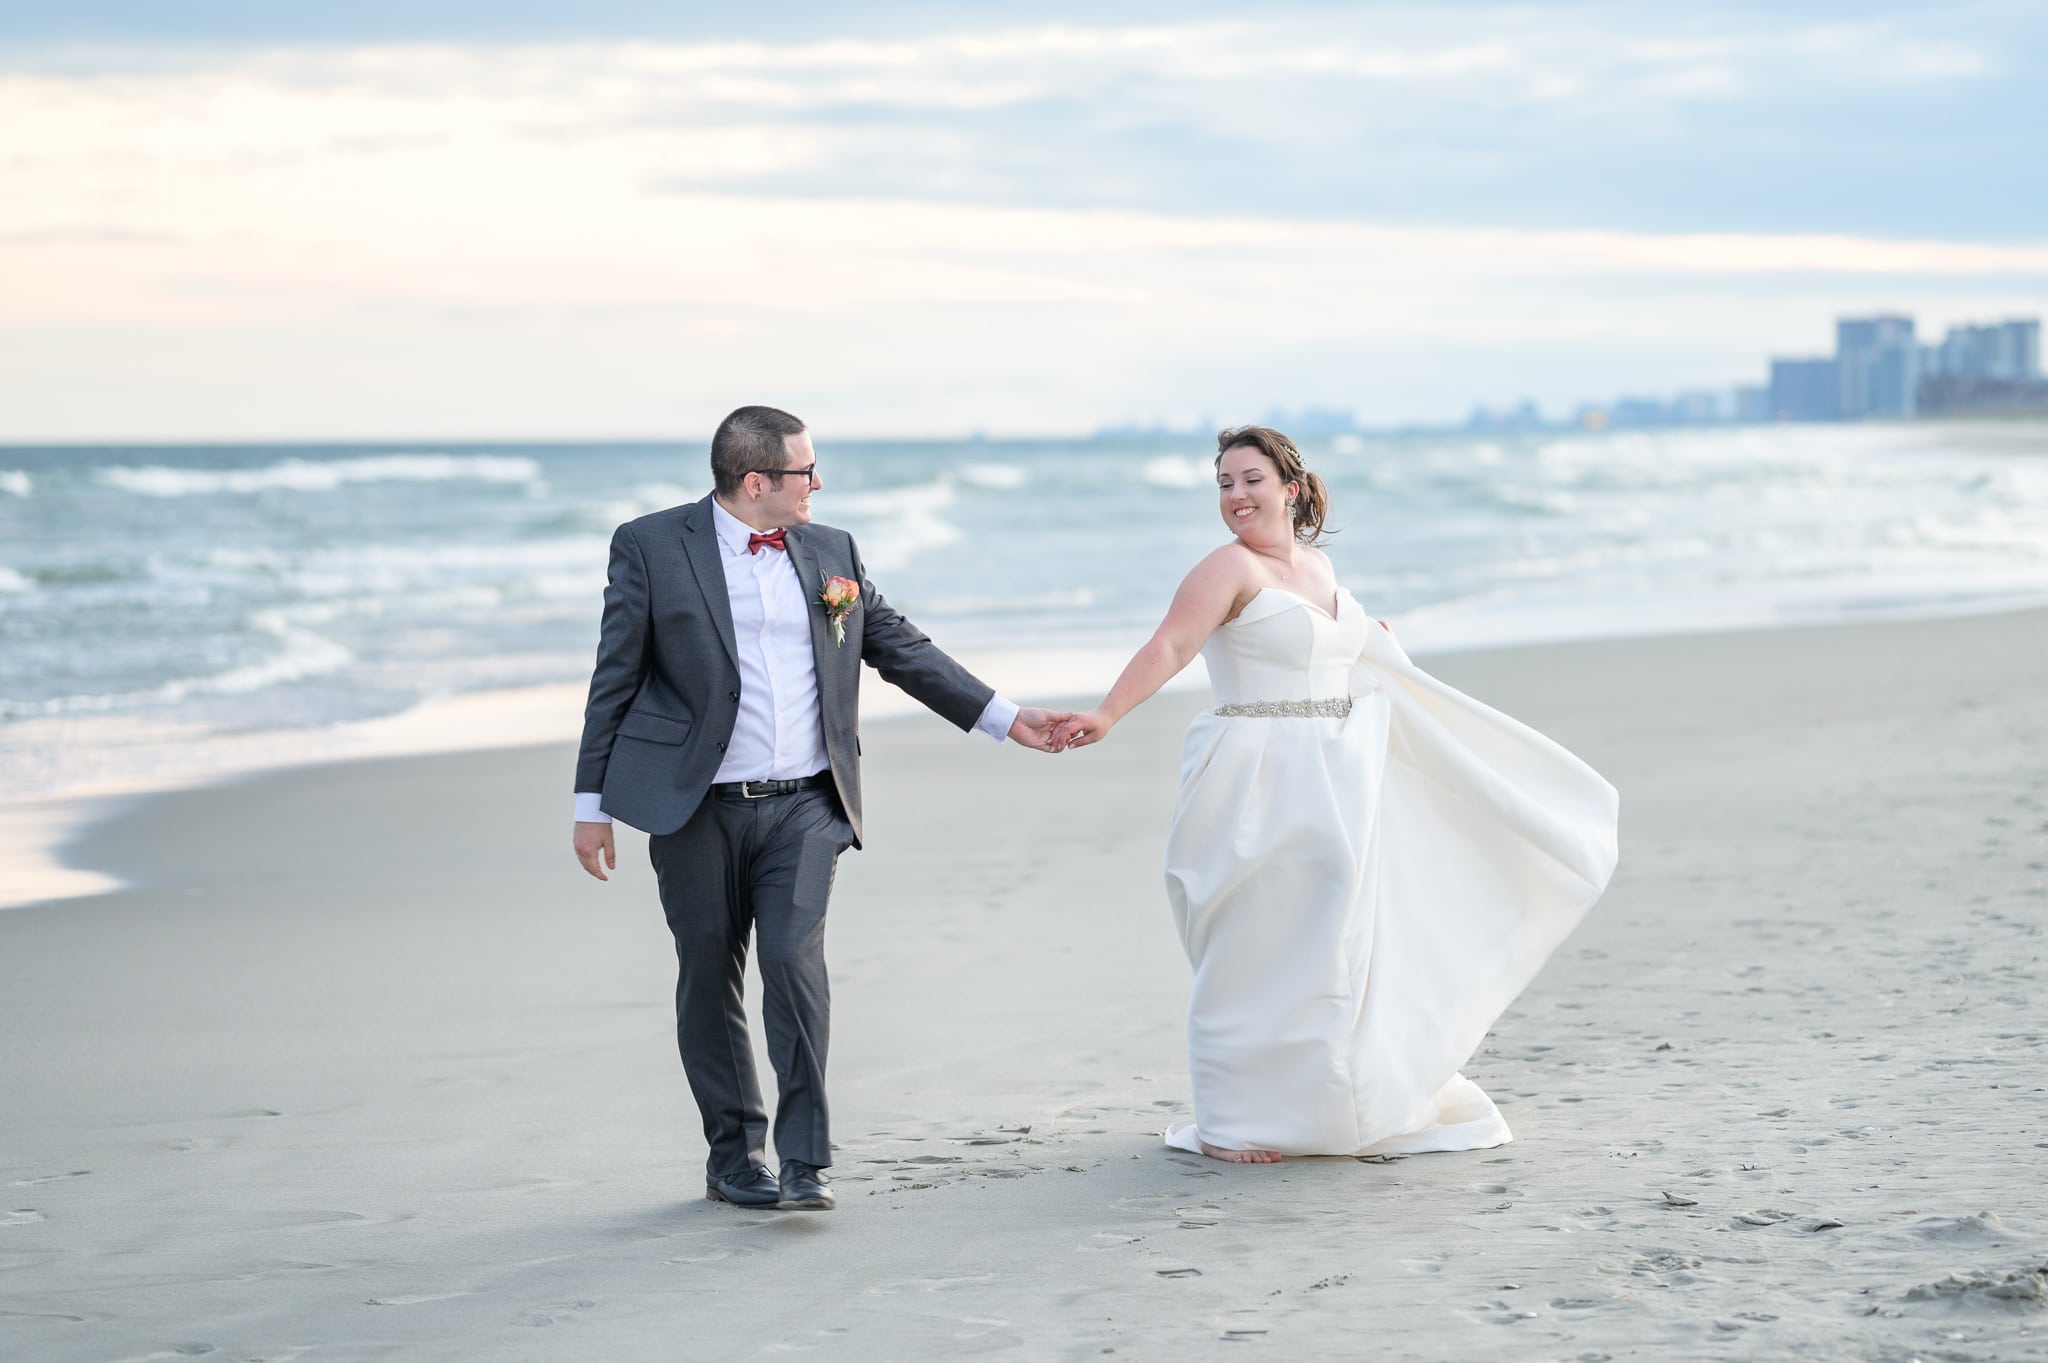 Bride and groom walking by the ocean together  - 21 Main Events at North Beach